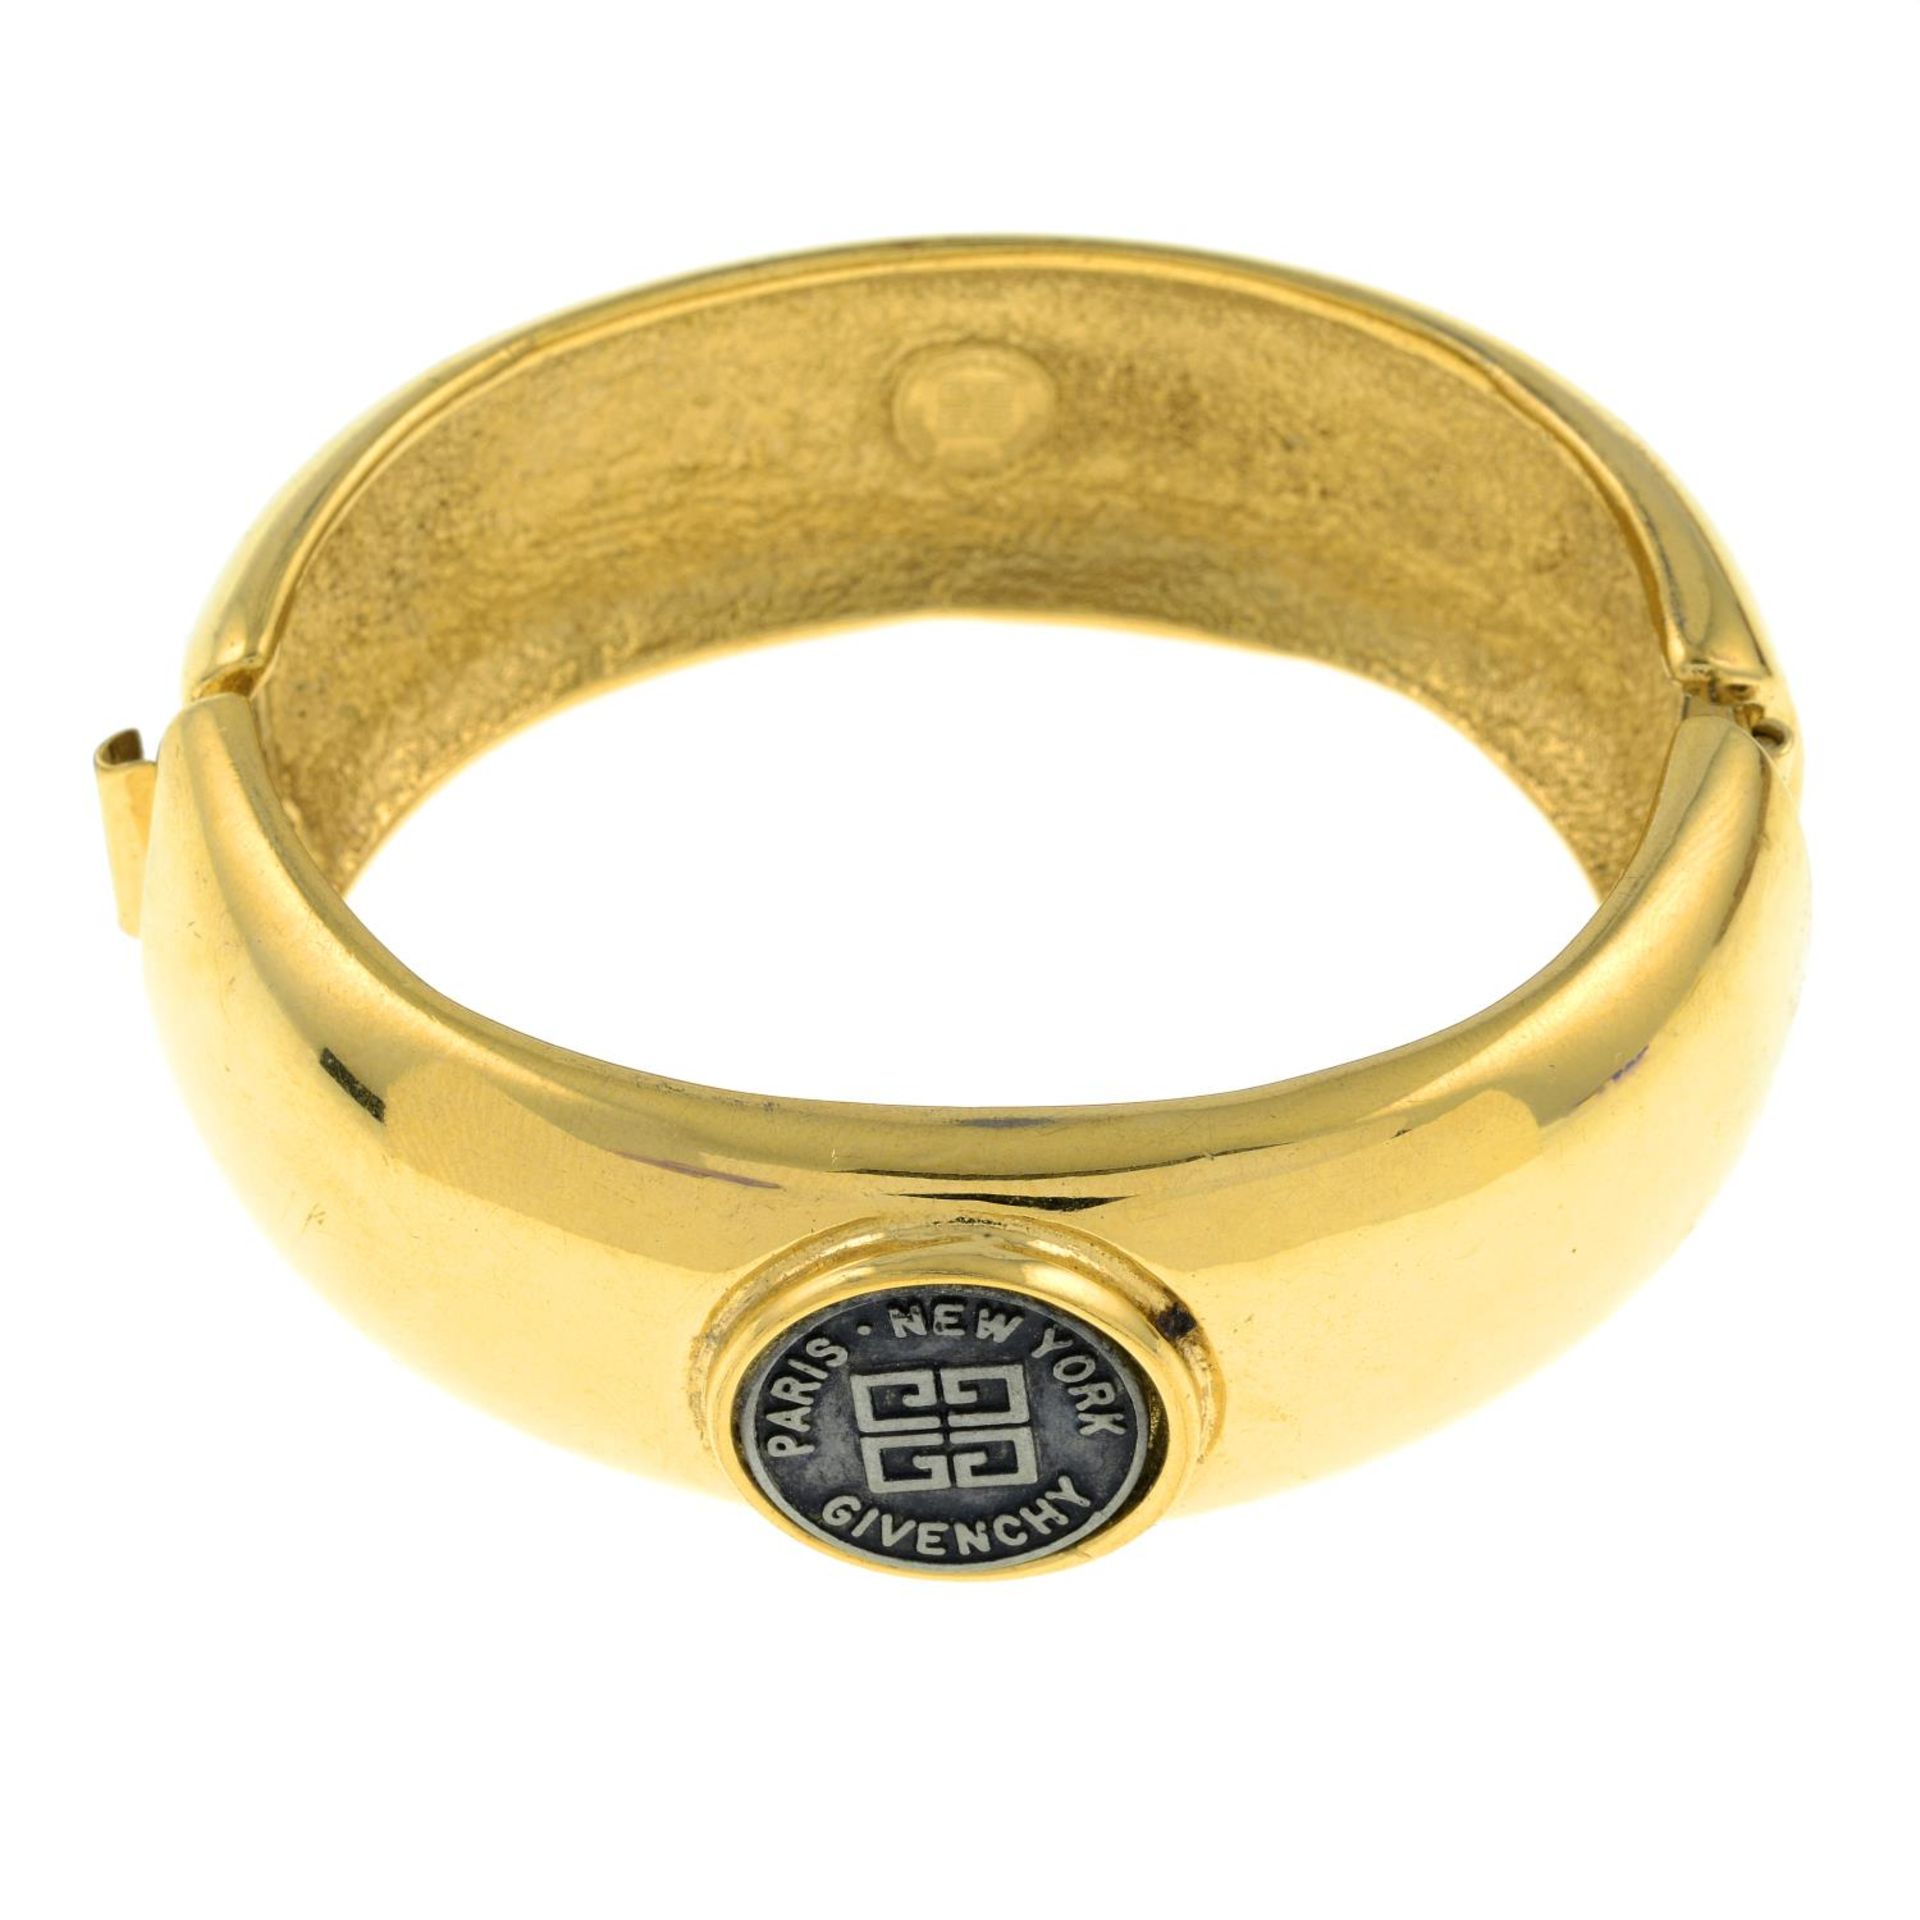 GIVENCHY - a vintage bangle with logo detail.Signed Givenchy.Inner diameter 5.5gms.